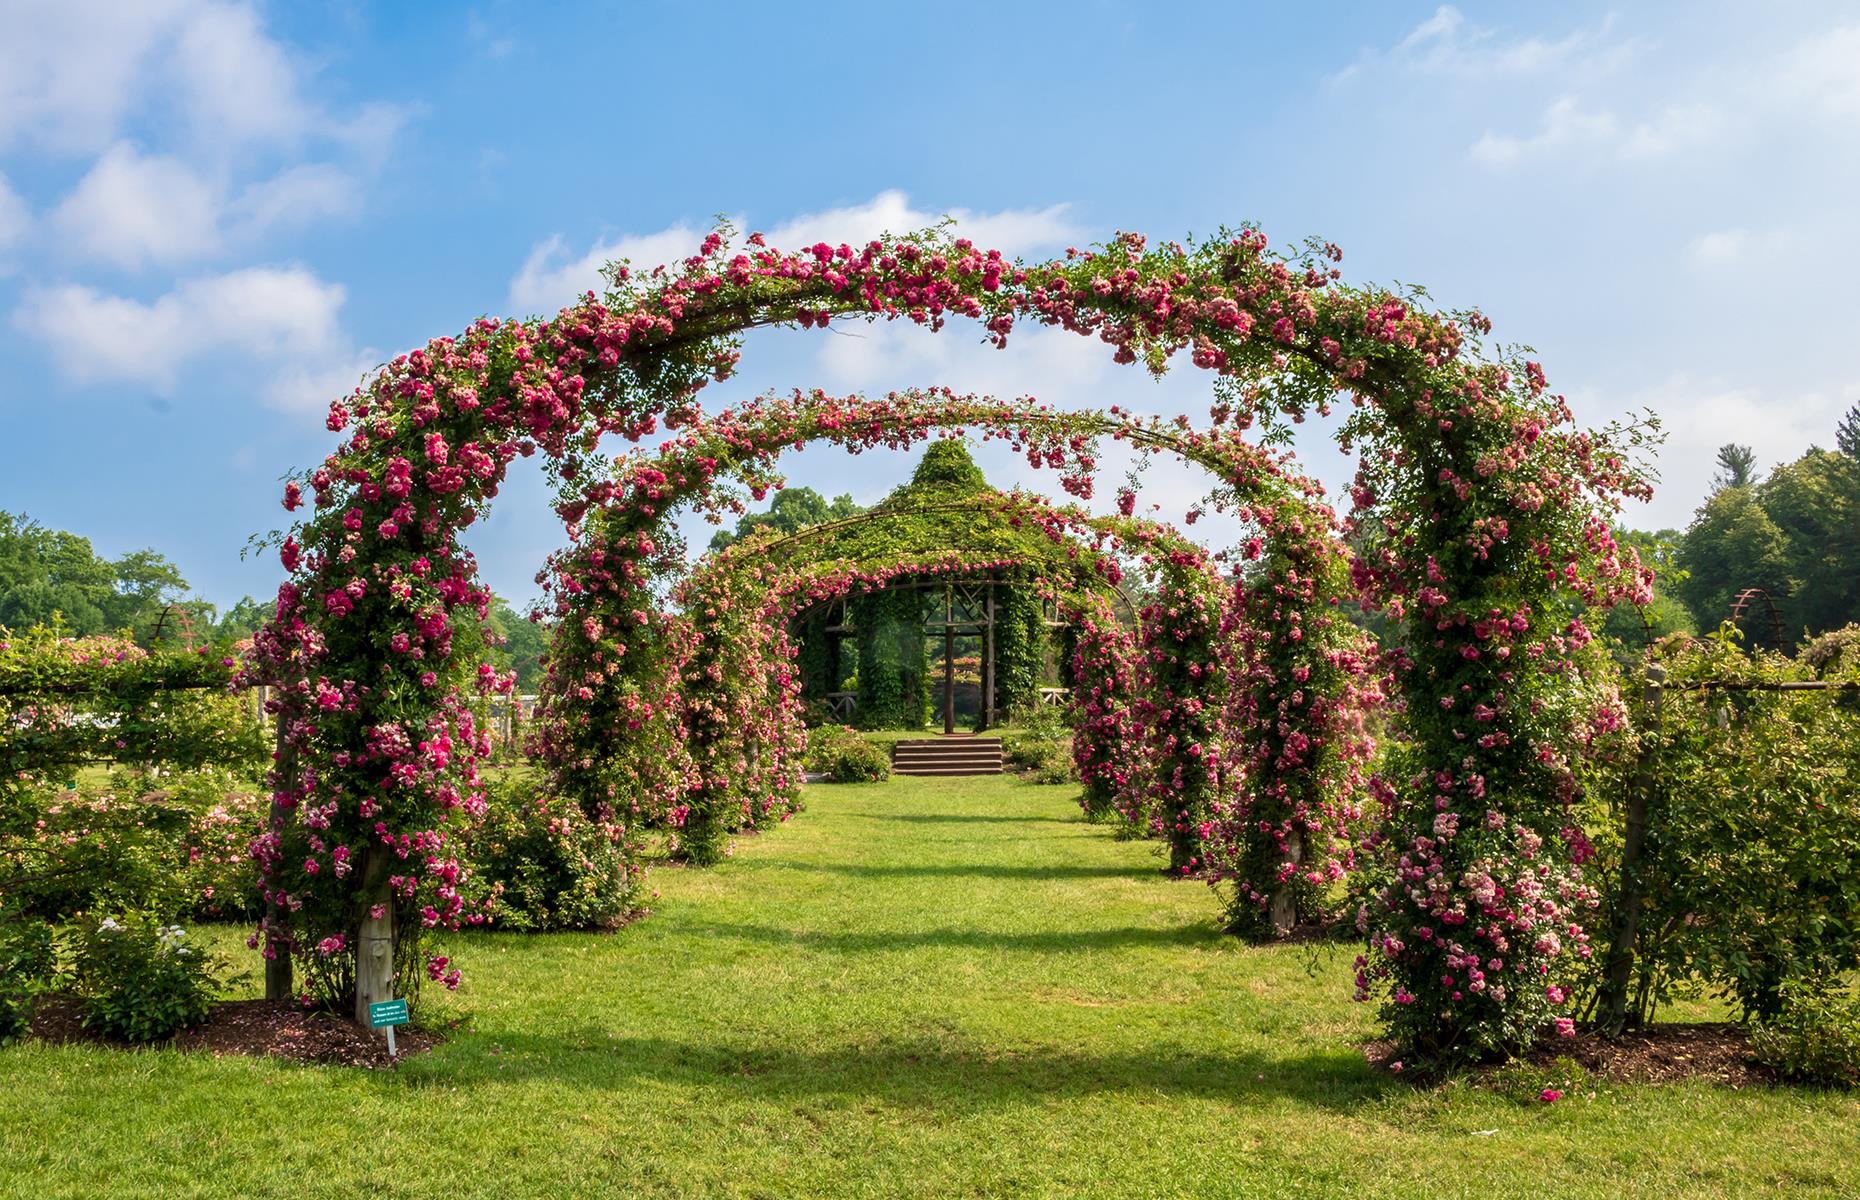 <p>Opened in 1904, <a href="https://www.elizabethparkct.org/">this public park</a> is home to America's oldest rose garden. More than 800 varieties of rose grow here, climbing trellises and clinging to arches, and blossoming from late June. The rest of the grounds stretch for 101 acres, dotted with greenhouses and ponds, and typically attracting plenty of flower-loving visitors each year.</p>